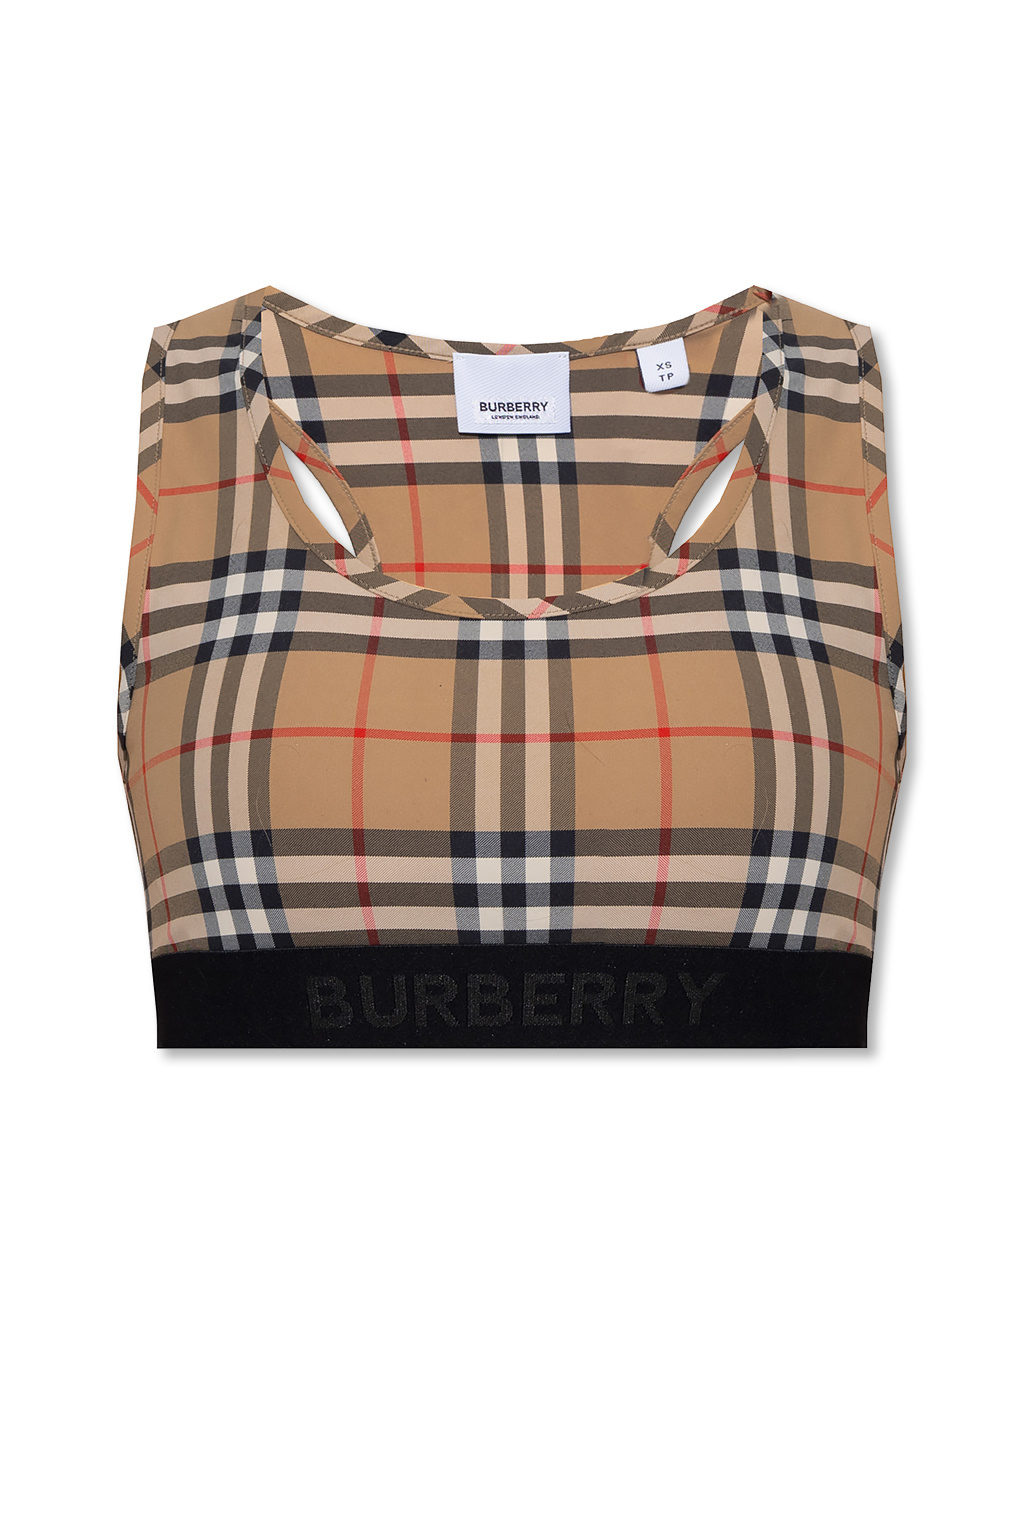 Buy Burberry Trousers online  Men  103 products  FASHIOLAin